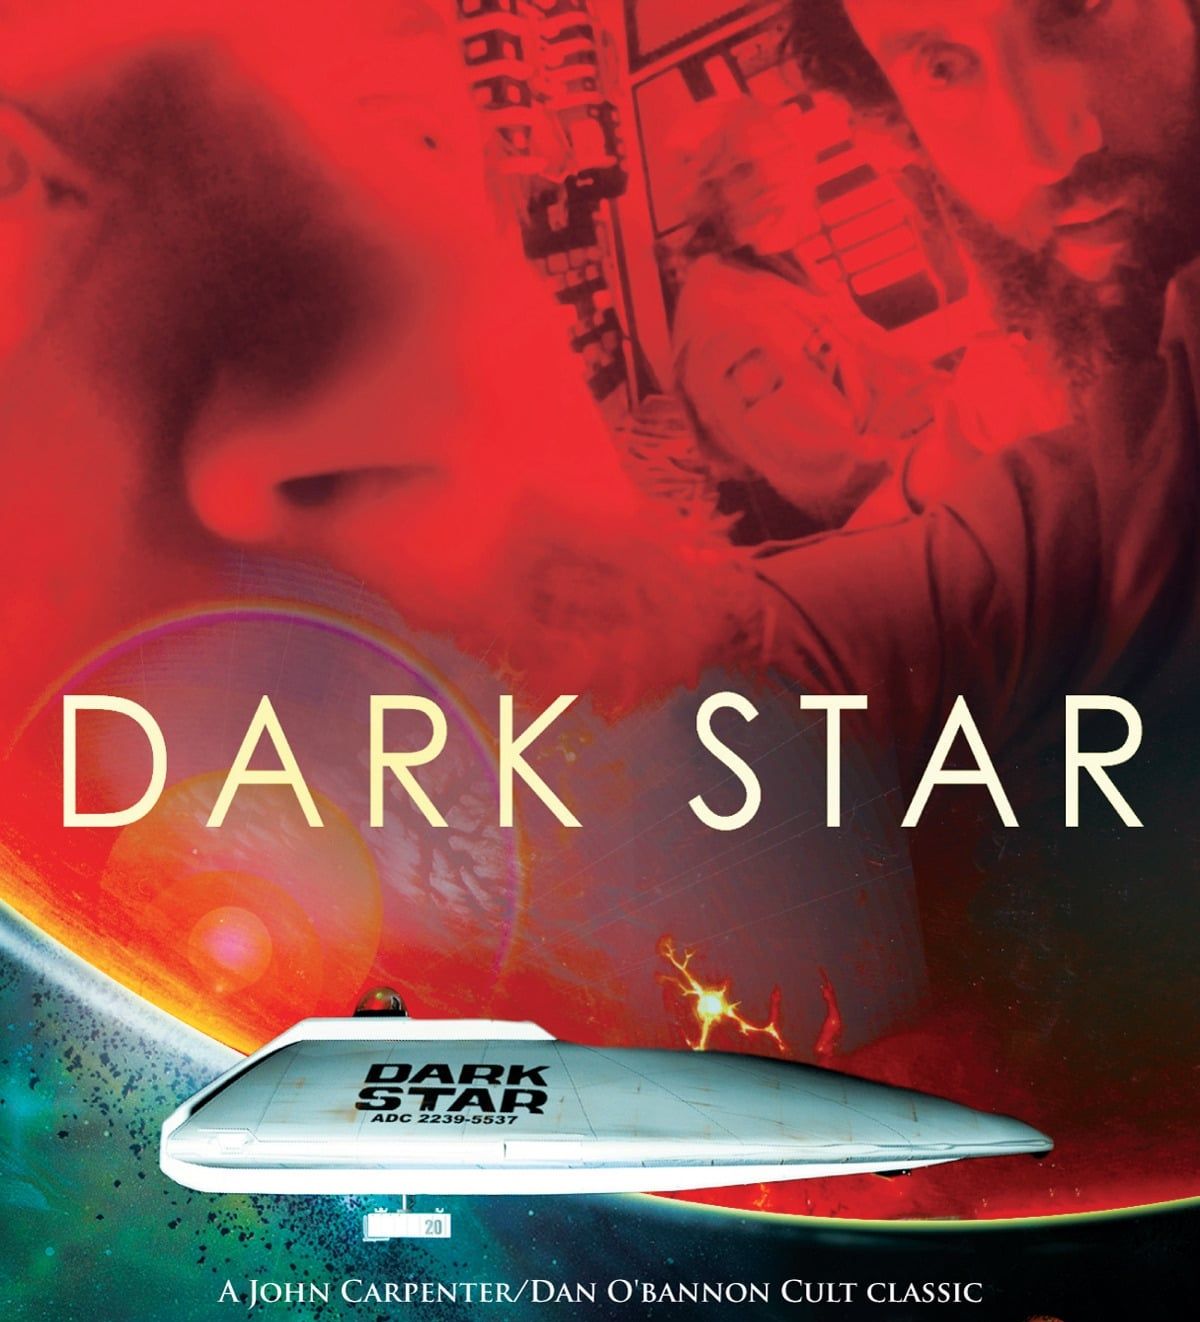 They're Not Lost In Space; They're Loose! - Dark Star (1974)